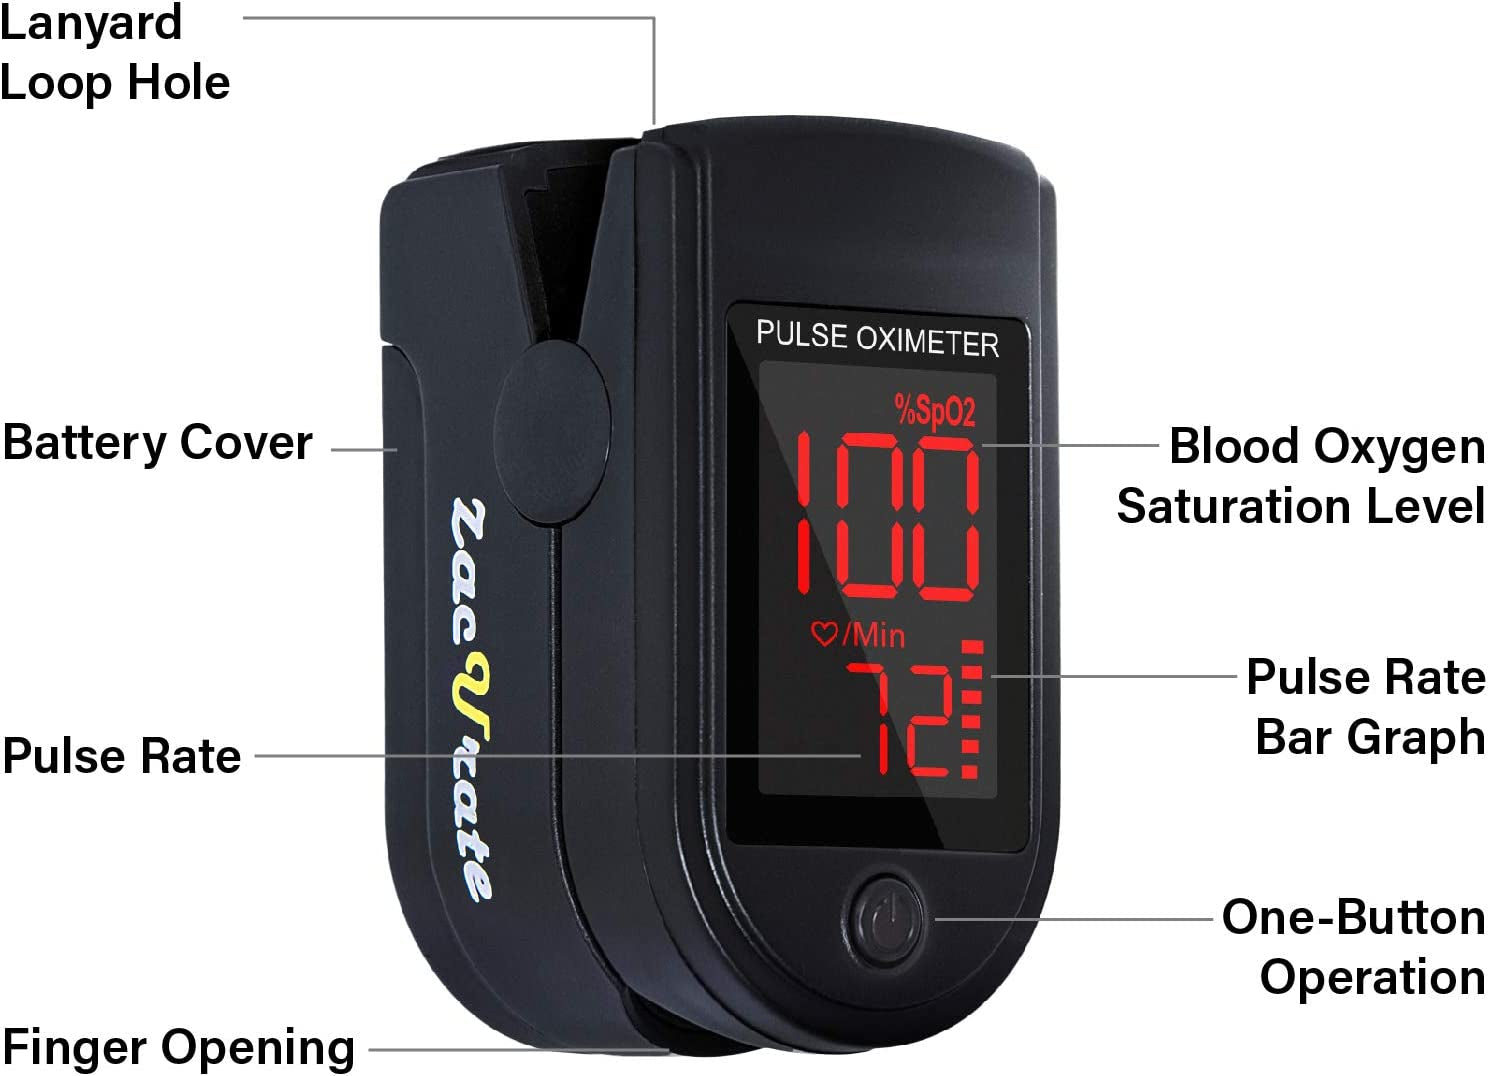 Pro Series 500DL Fingertip Pulse Oximeter Blood Oxygen Saturation Monitor with Silicon Cover, Batteries and Lanyard (Royal Black)